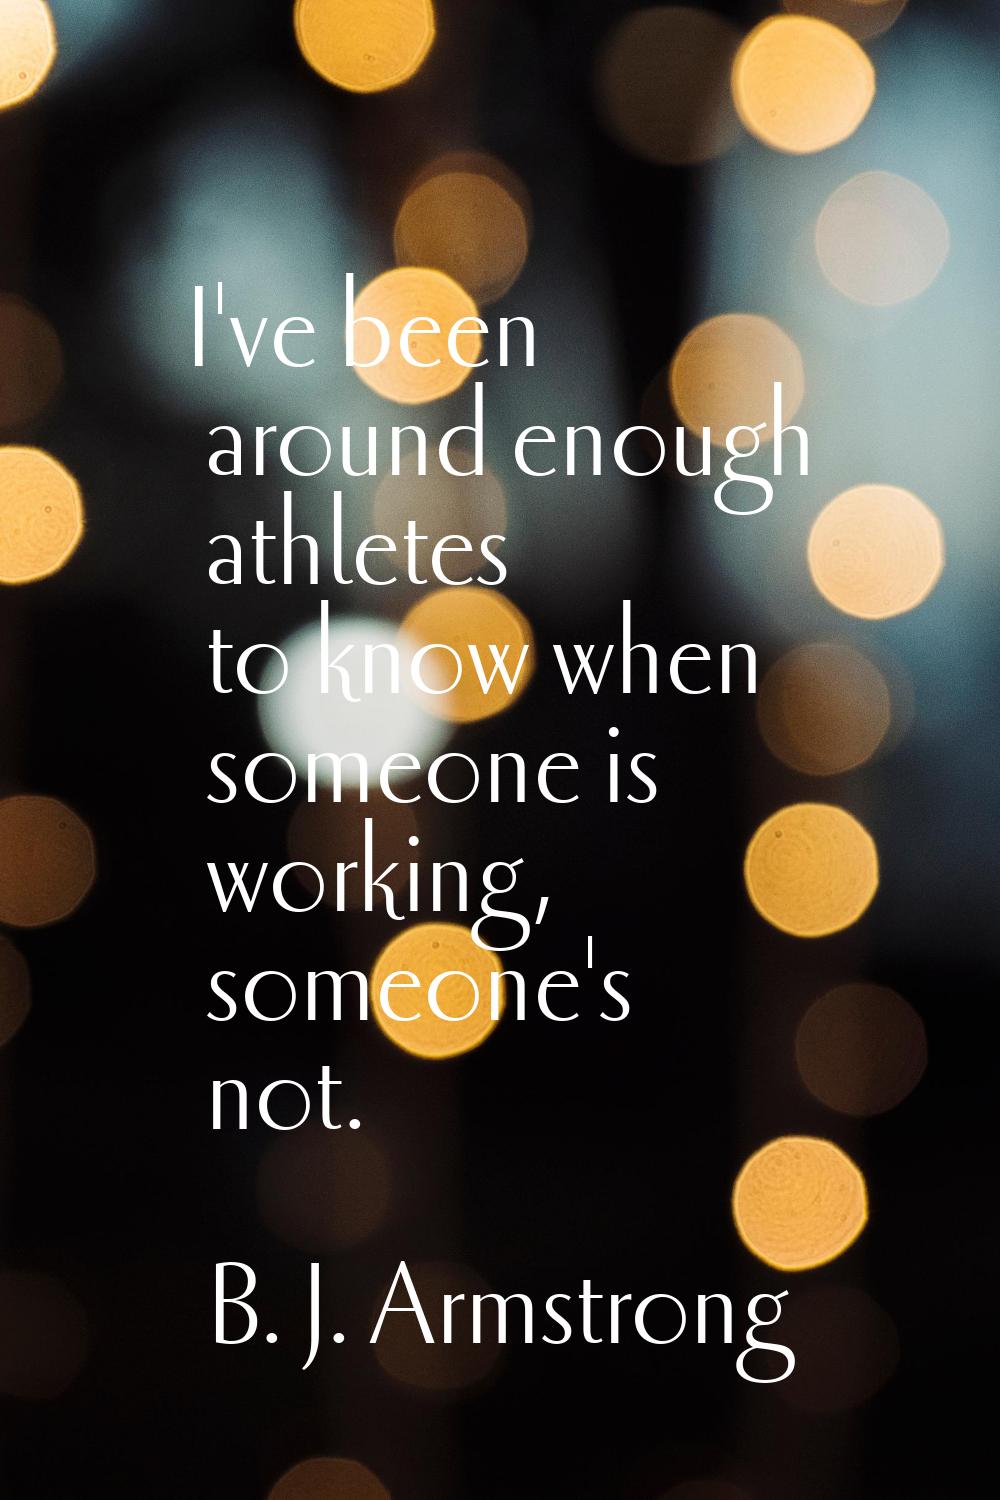 I've been around enough athletes to know when someone is working, someone's not.